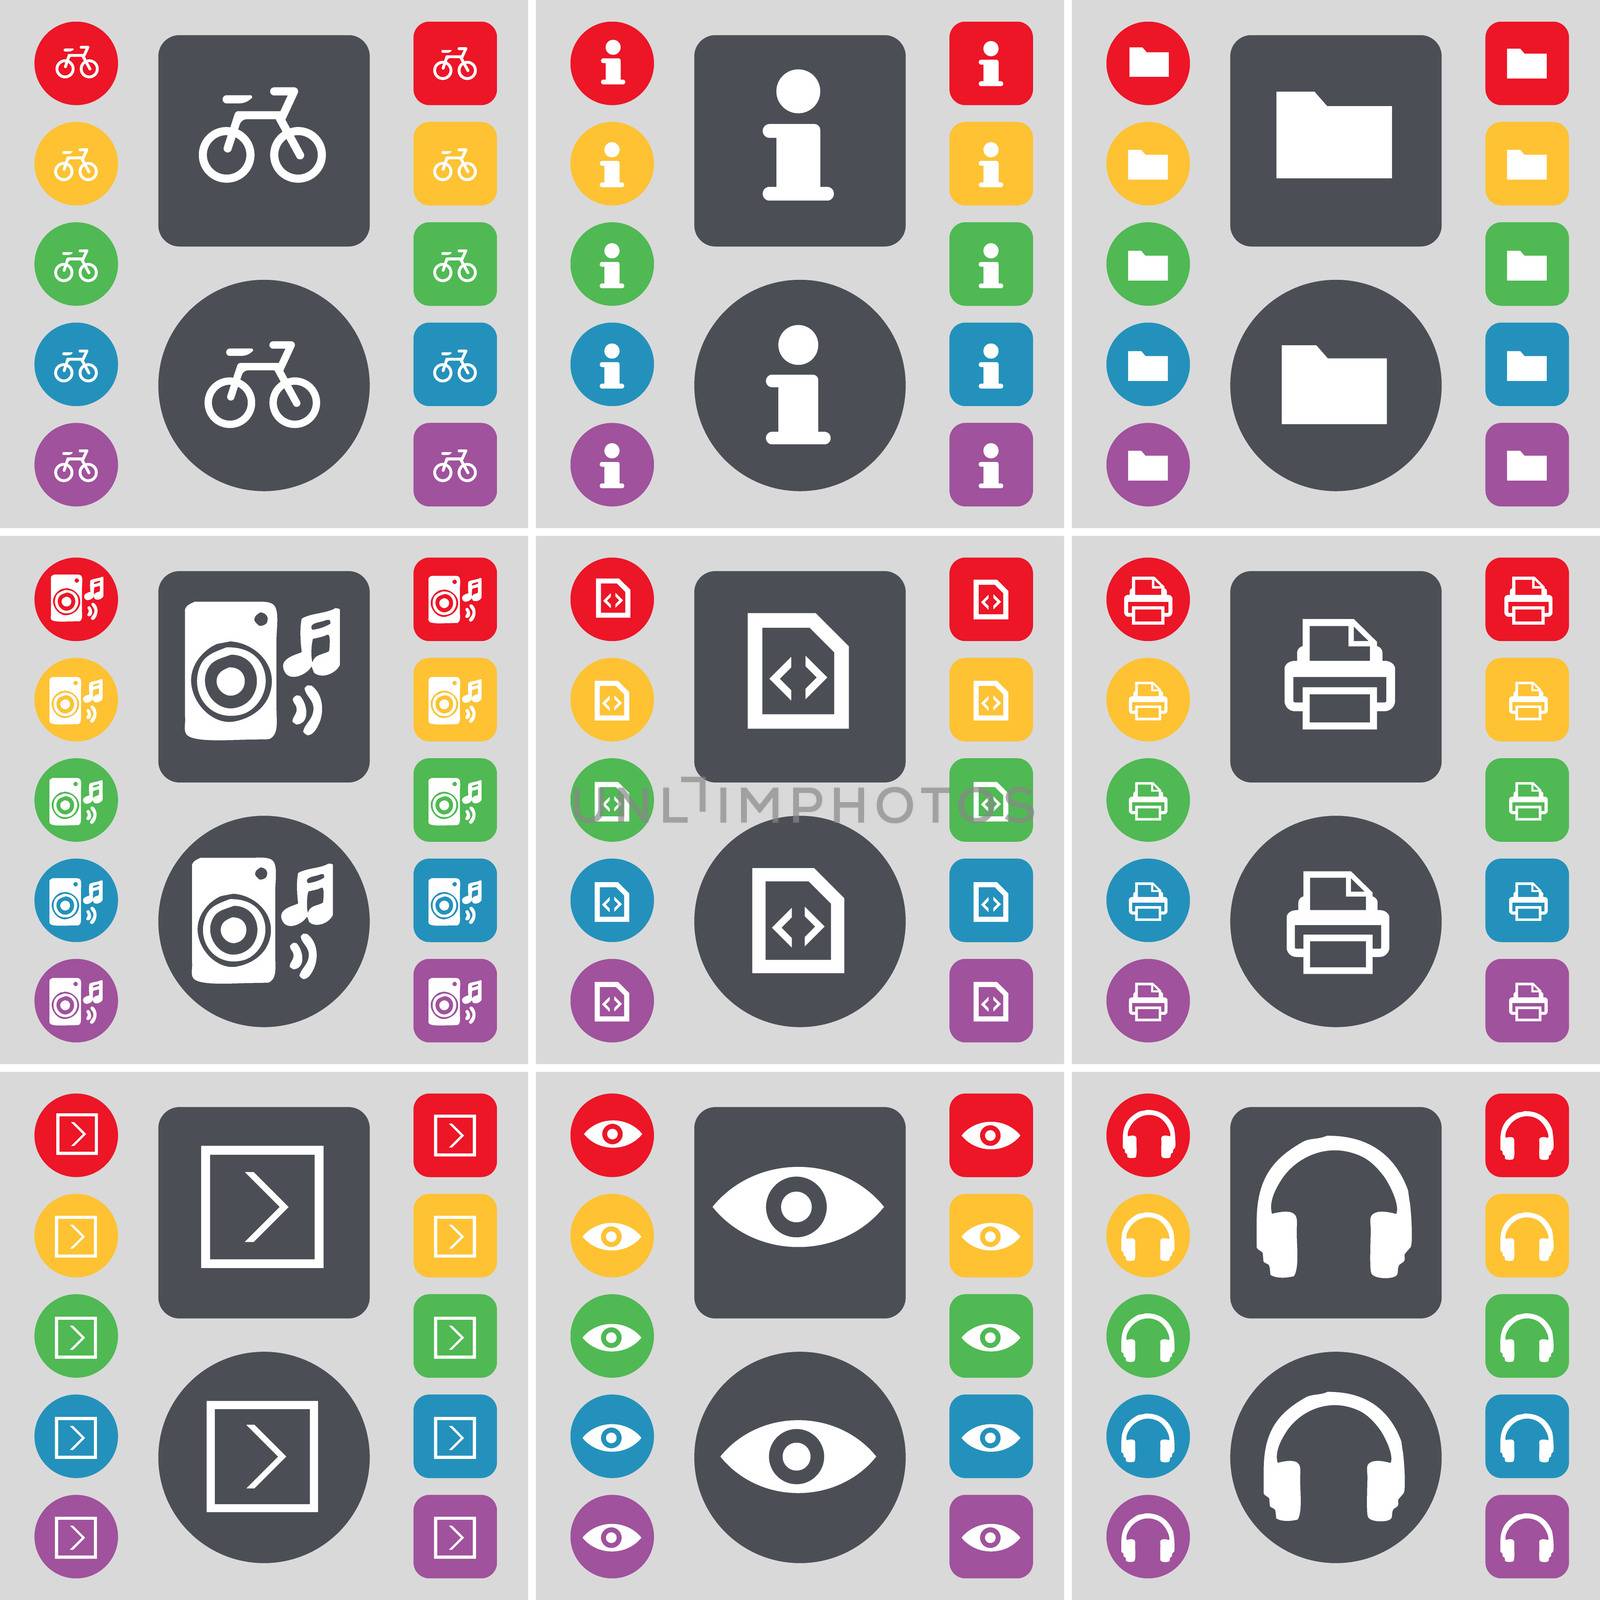 Bicycle, Information, Folder, Speaker, File, Printer, Arrowr right, Vision, Headphones icon symbol. A large set of flat, colored buttons for your design. illustration